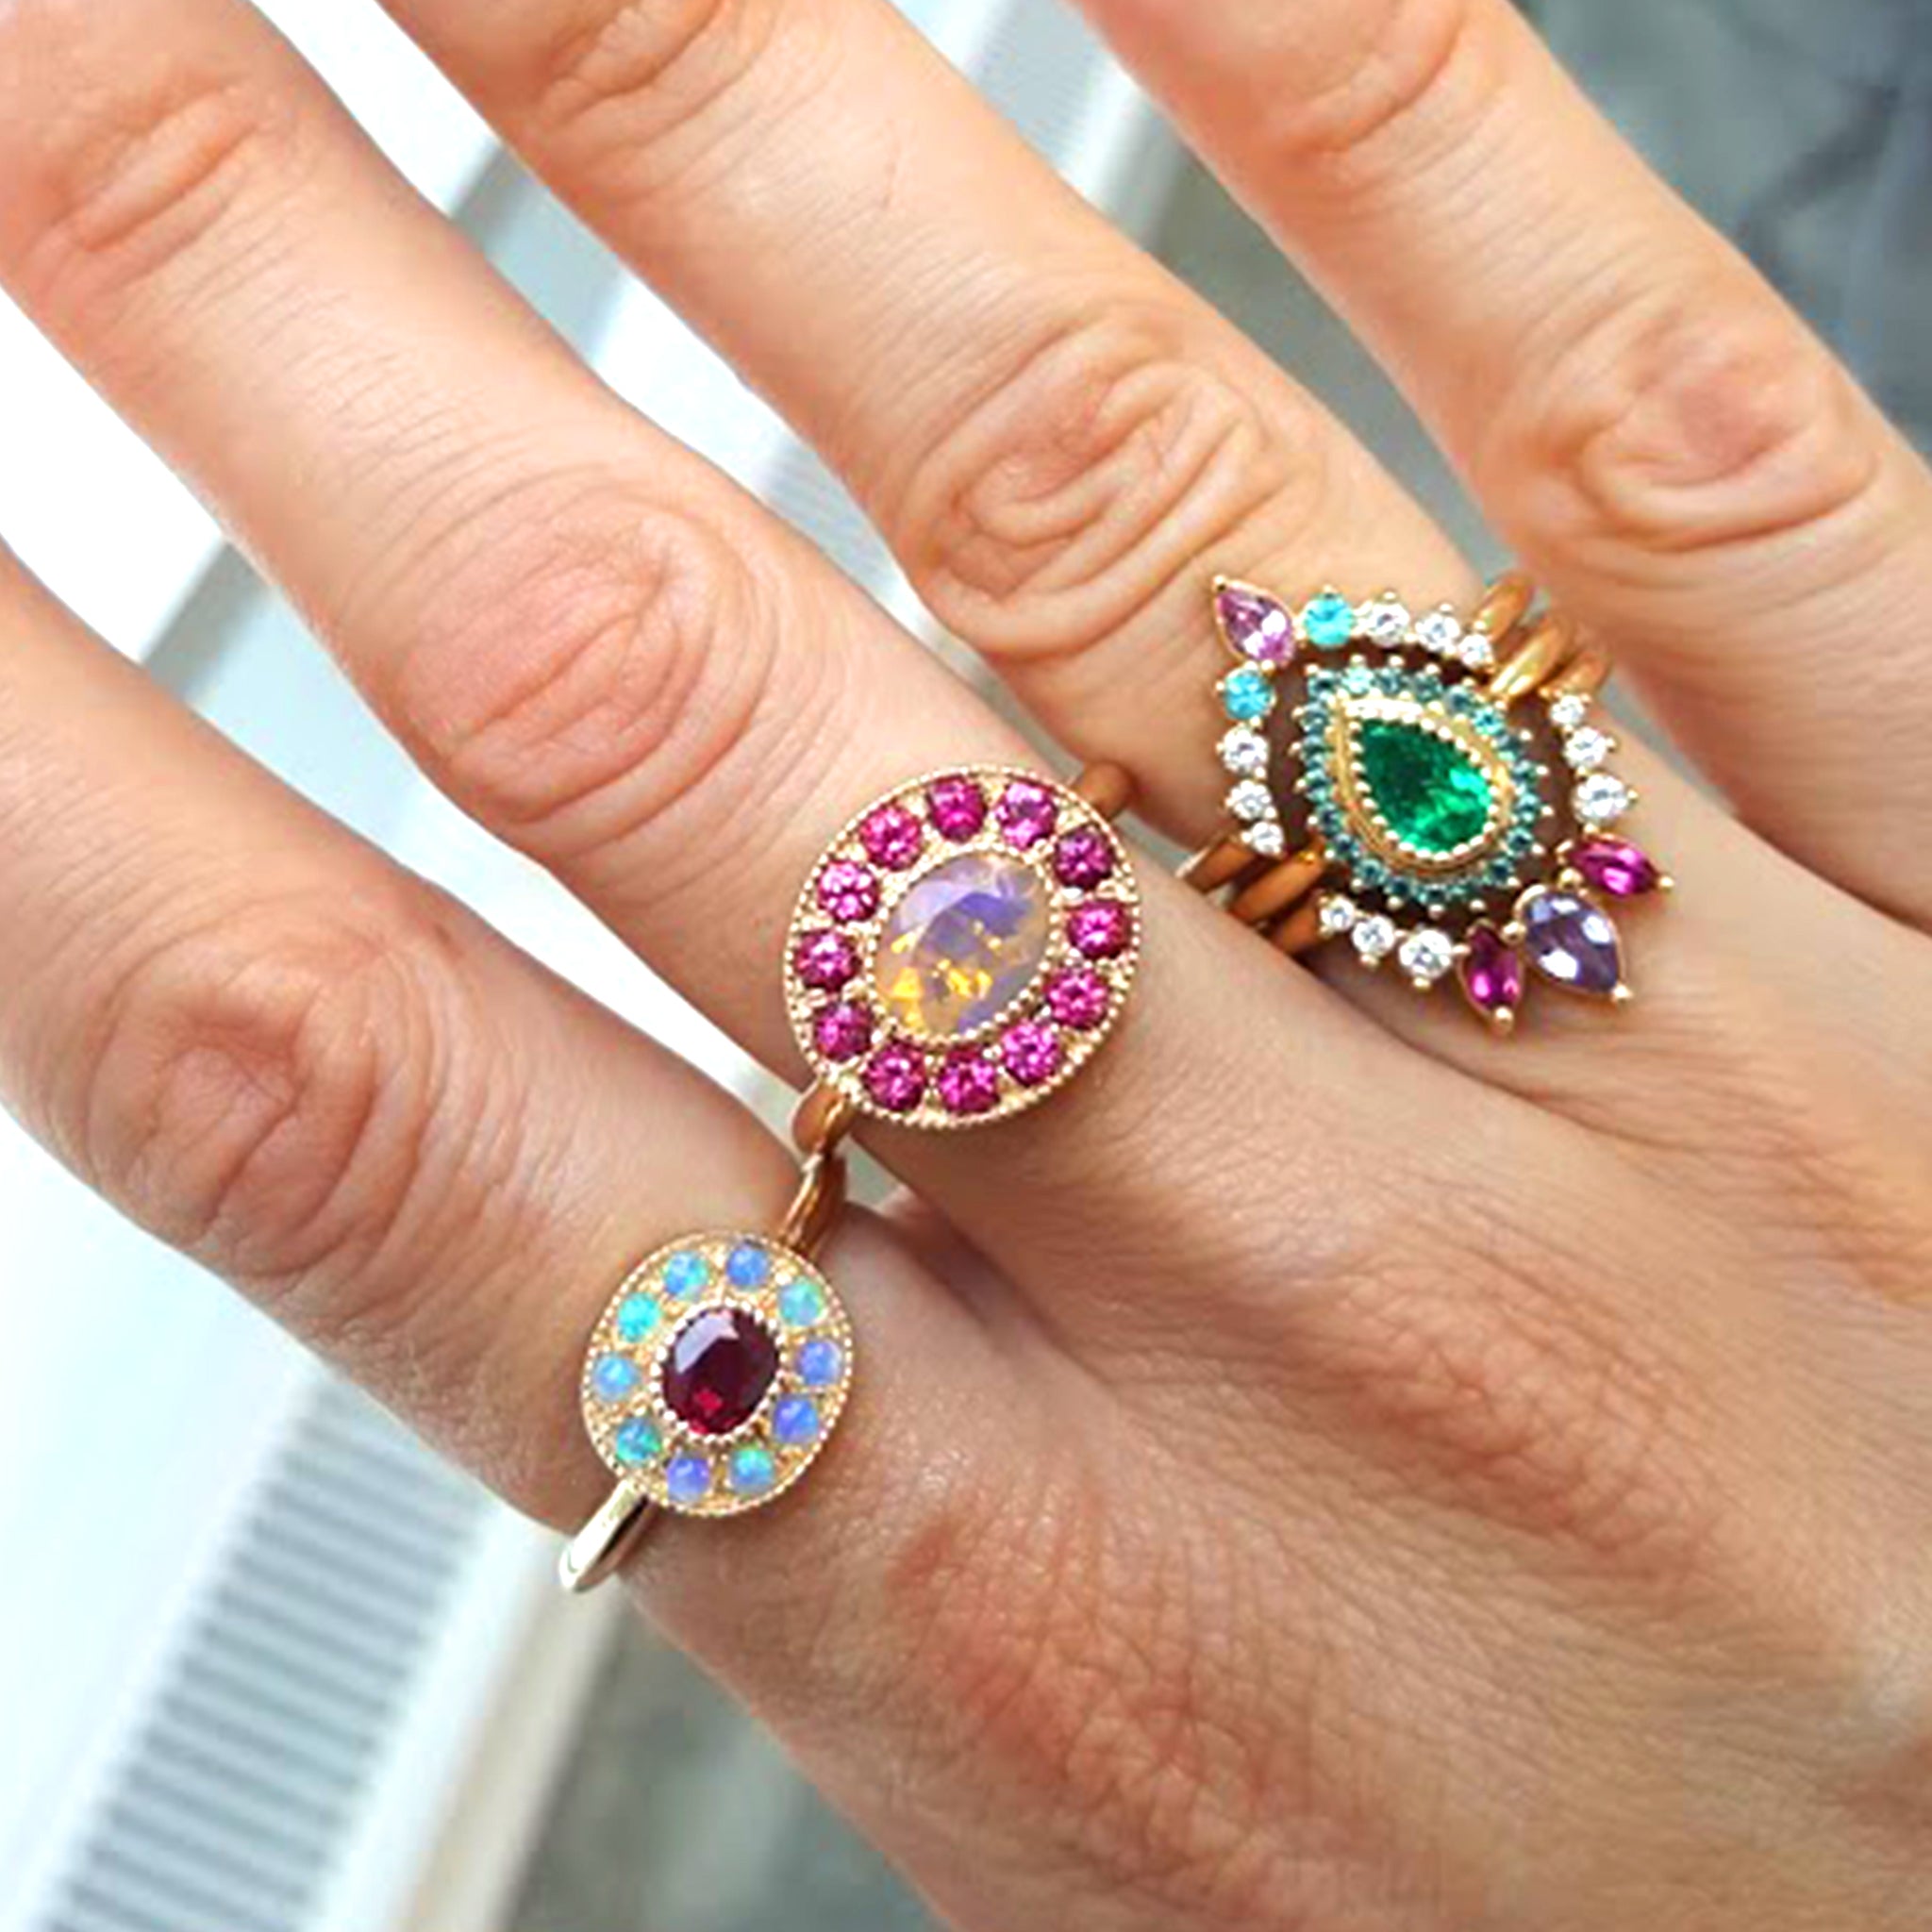 Woman's hand adorned with three Lico rings, one being the one-of-a-kind Ruby halo ring with mini Australian opals, retro-antique inspired design by Lico Jewelry, set in solid 14k yellow gold.